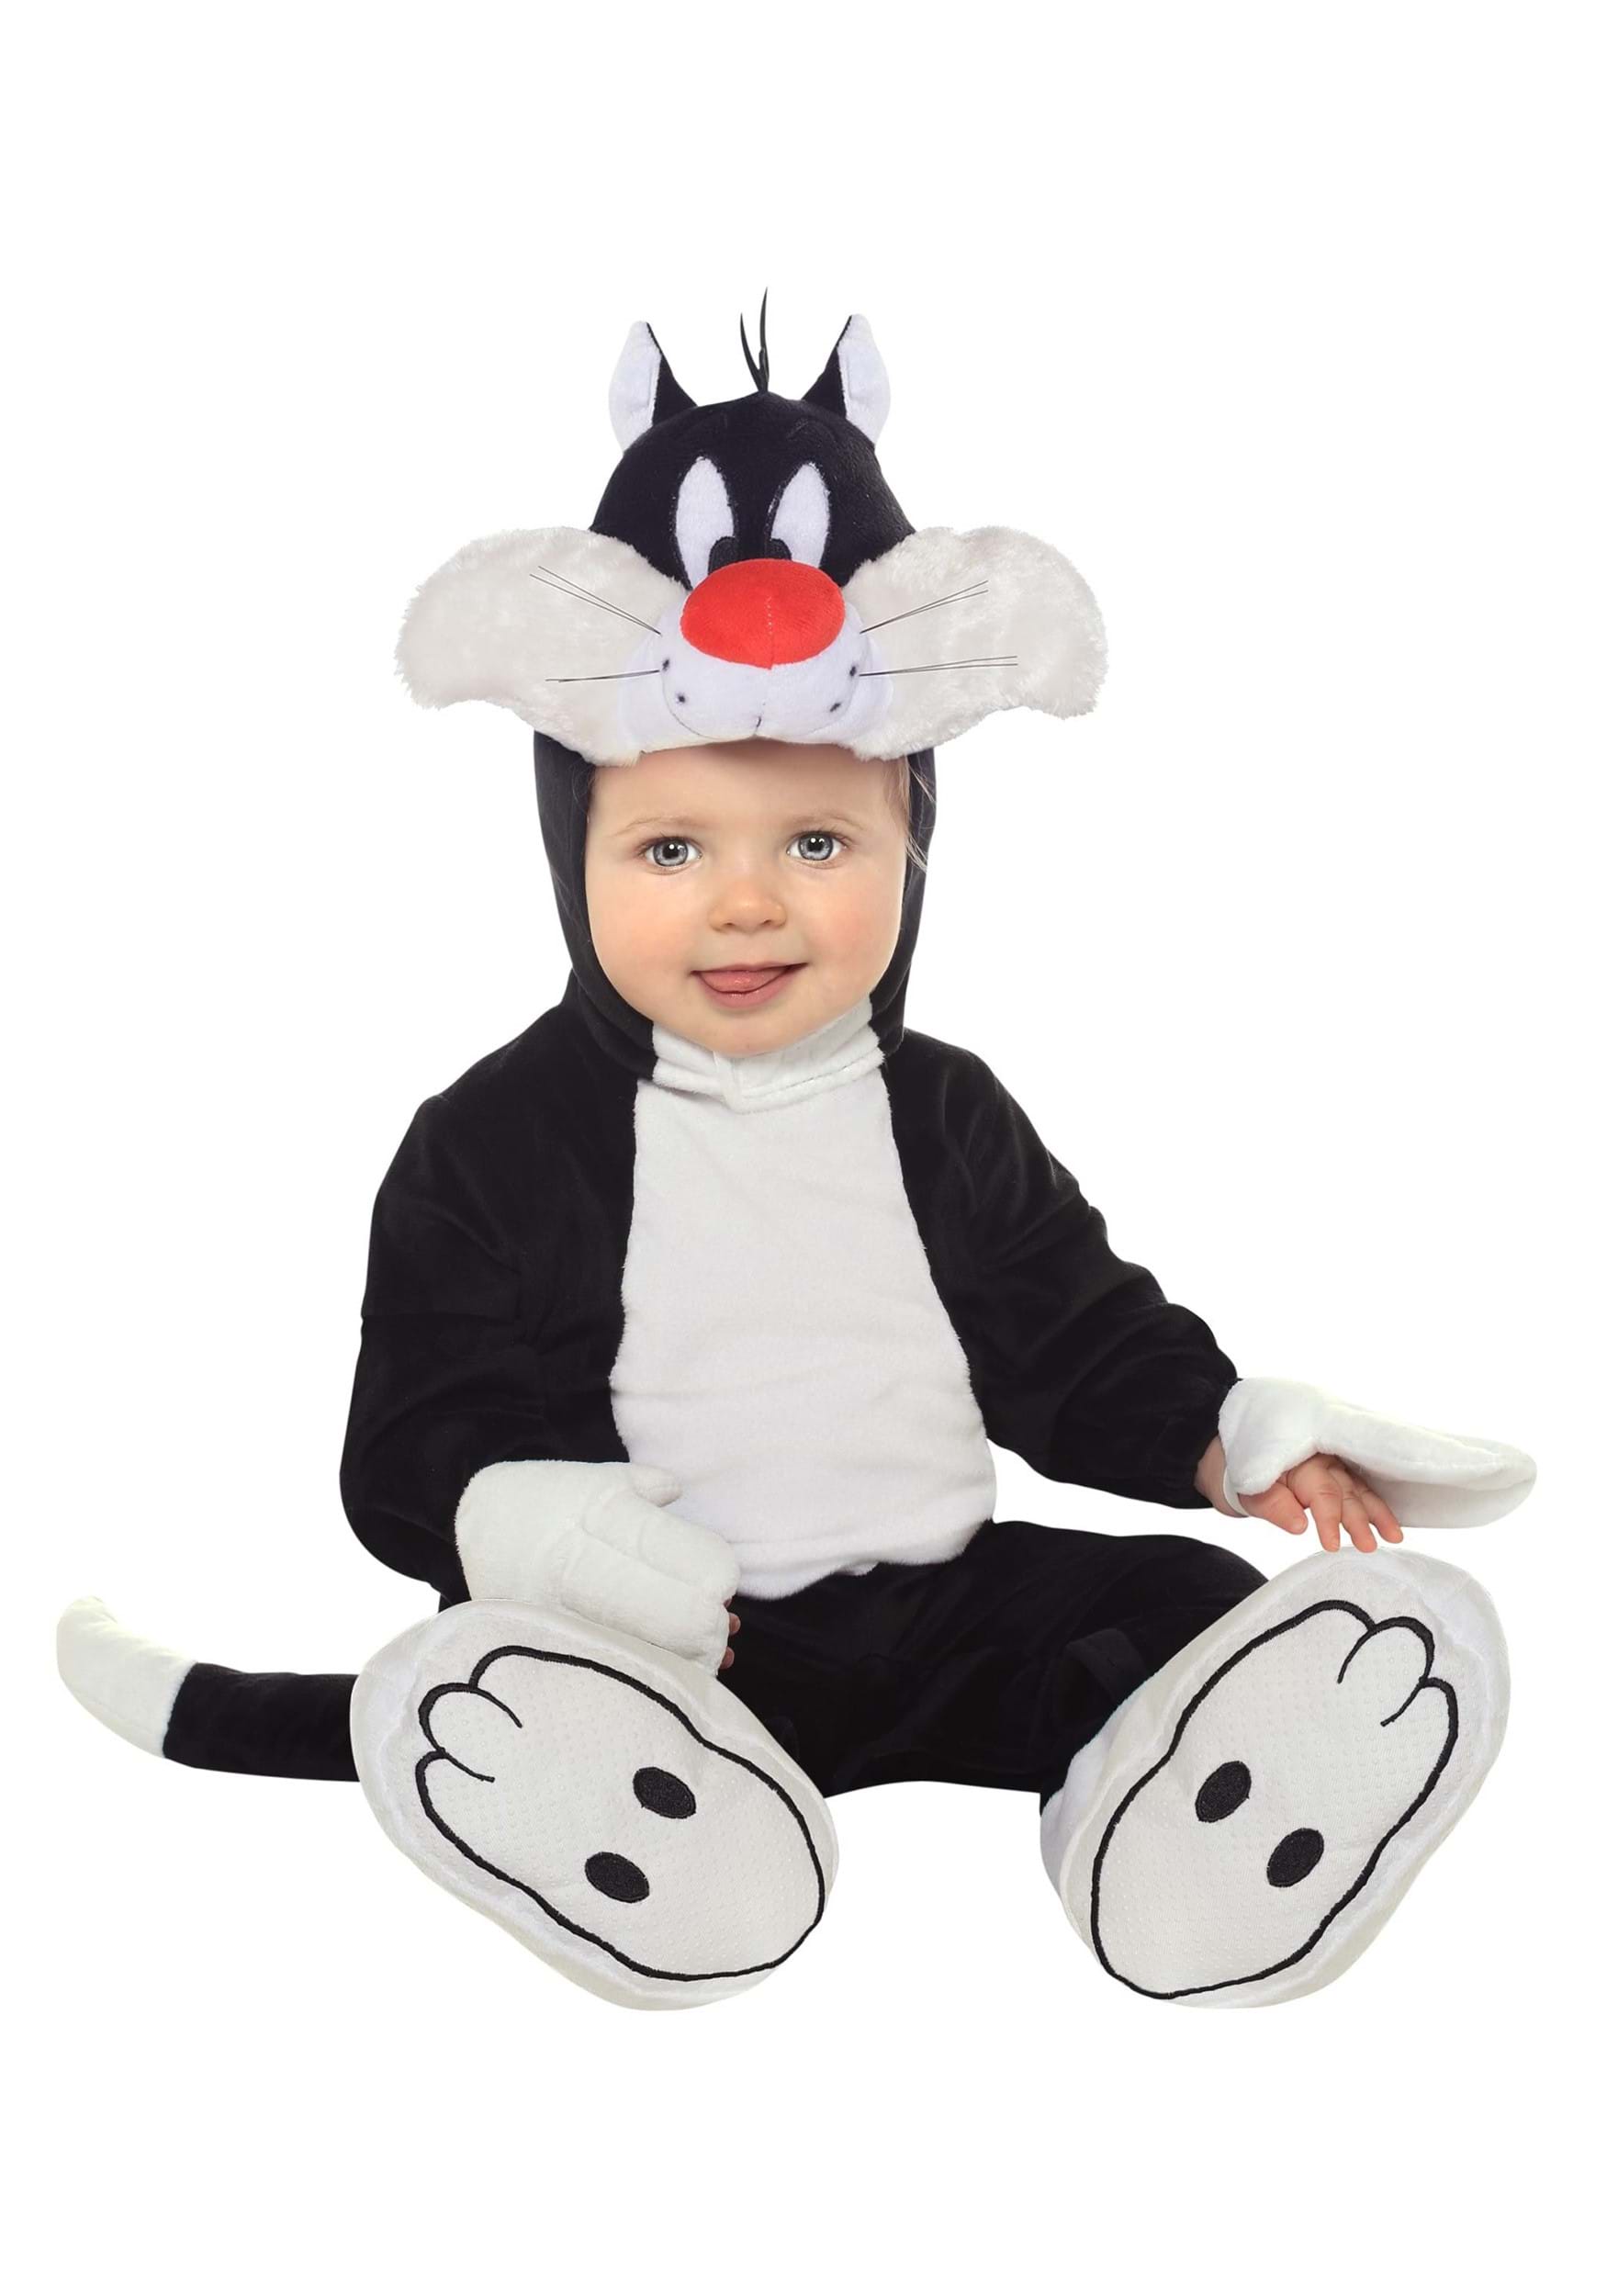 Sylvester Toddler Looney Tunes Costume